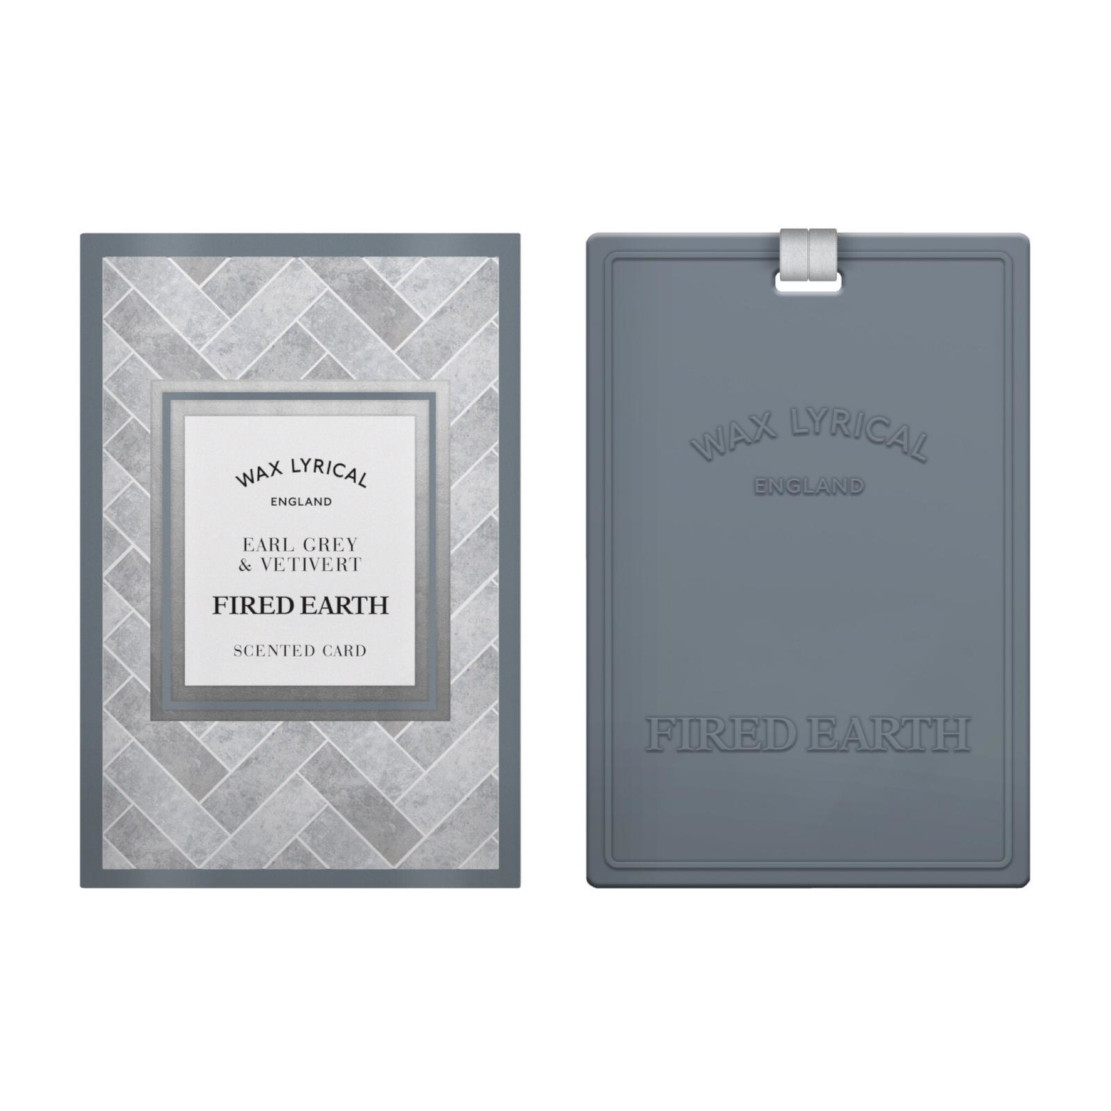 Wax Lyrical Fired Earth Speciality Earl Grey & Vetivert Scented Card